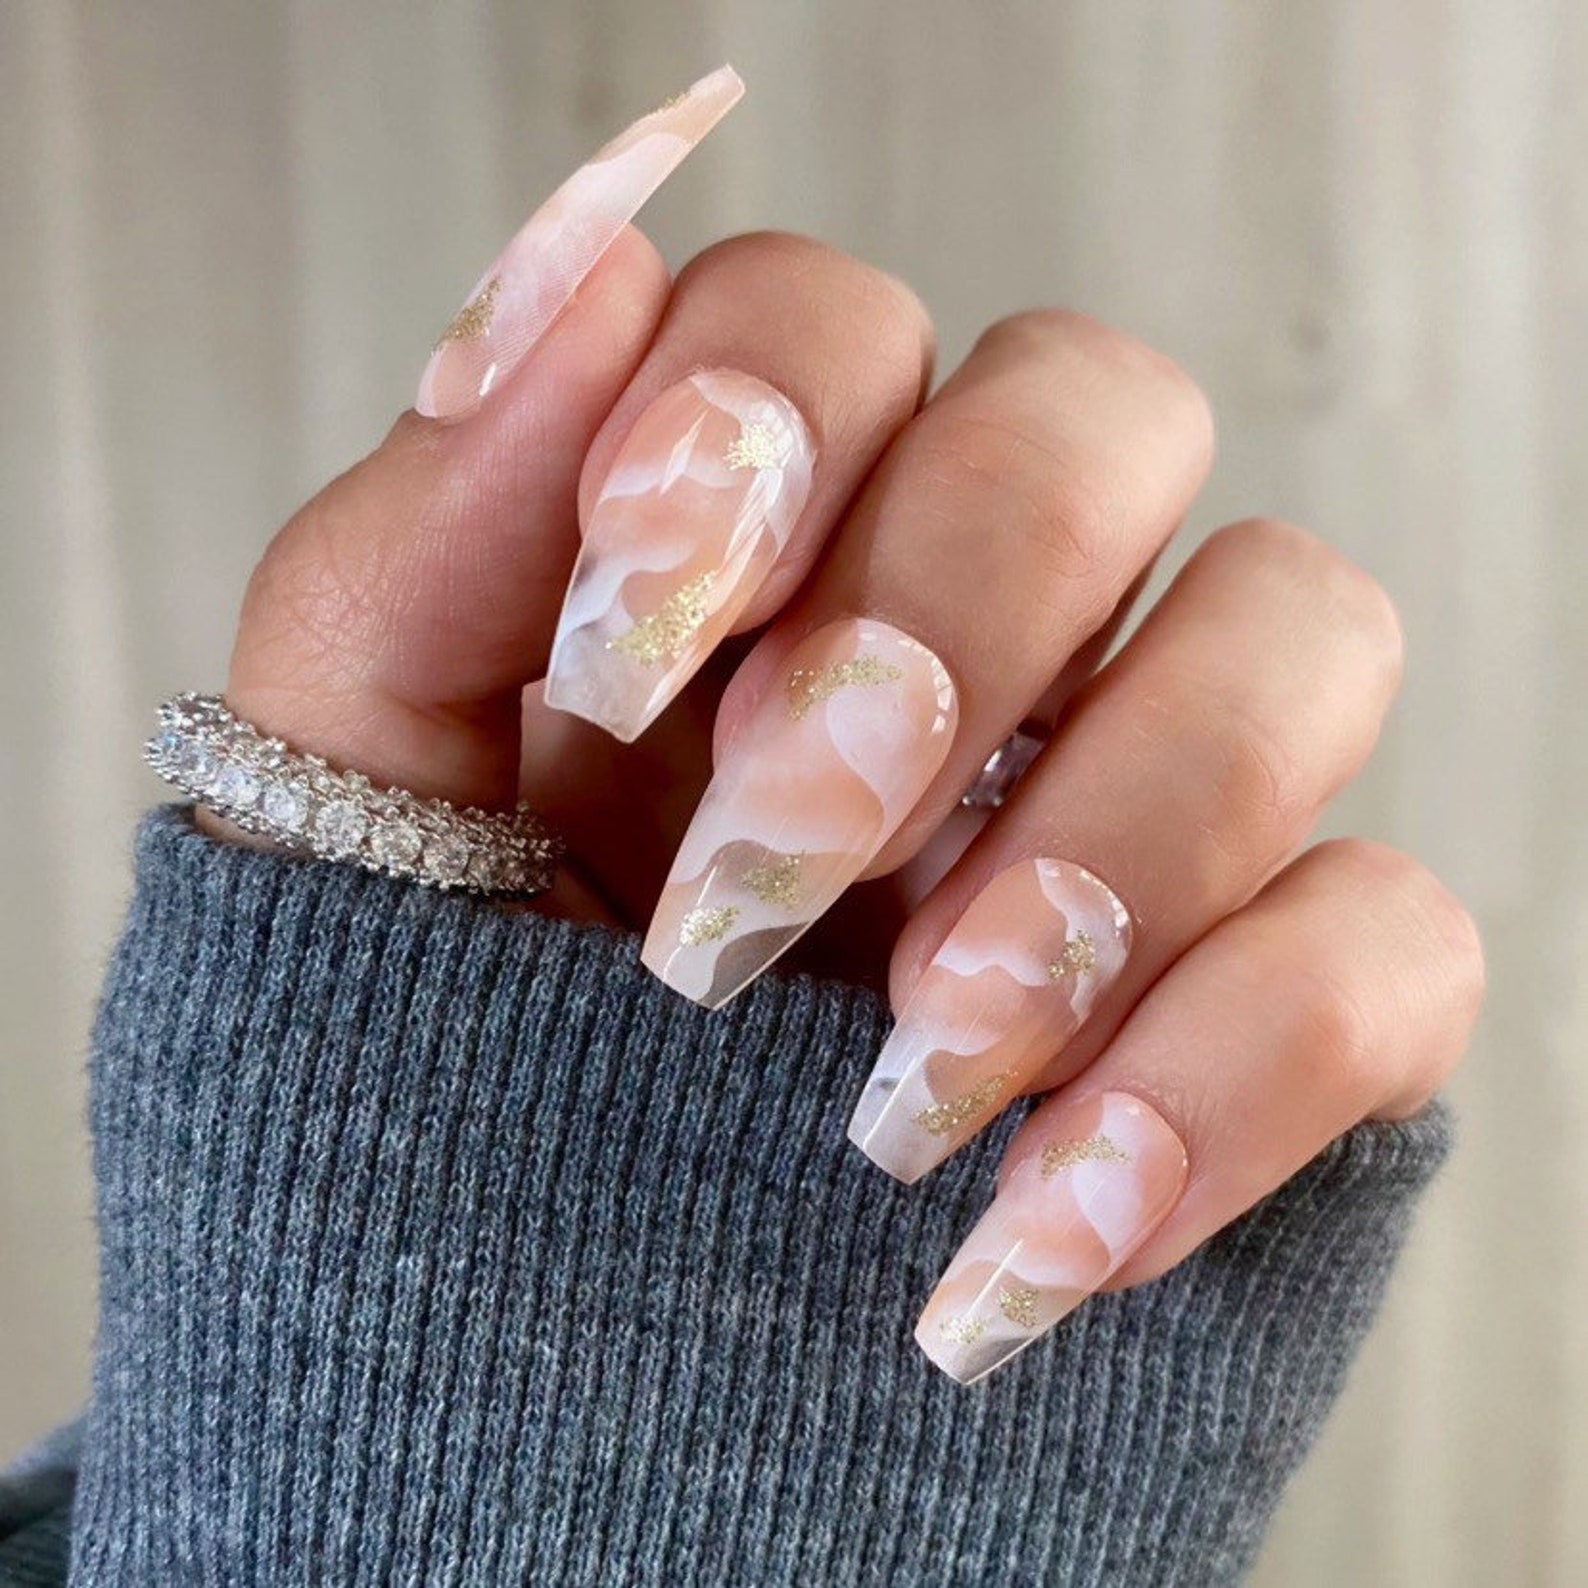 What is gel overlay nails - New Expression Nails